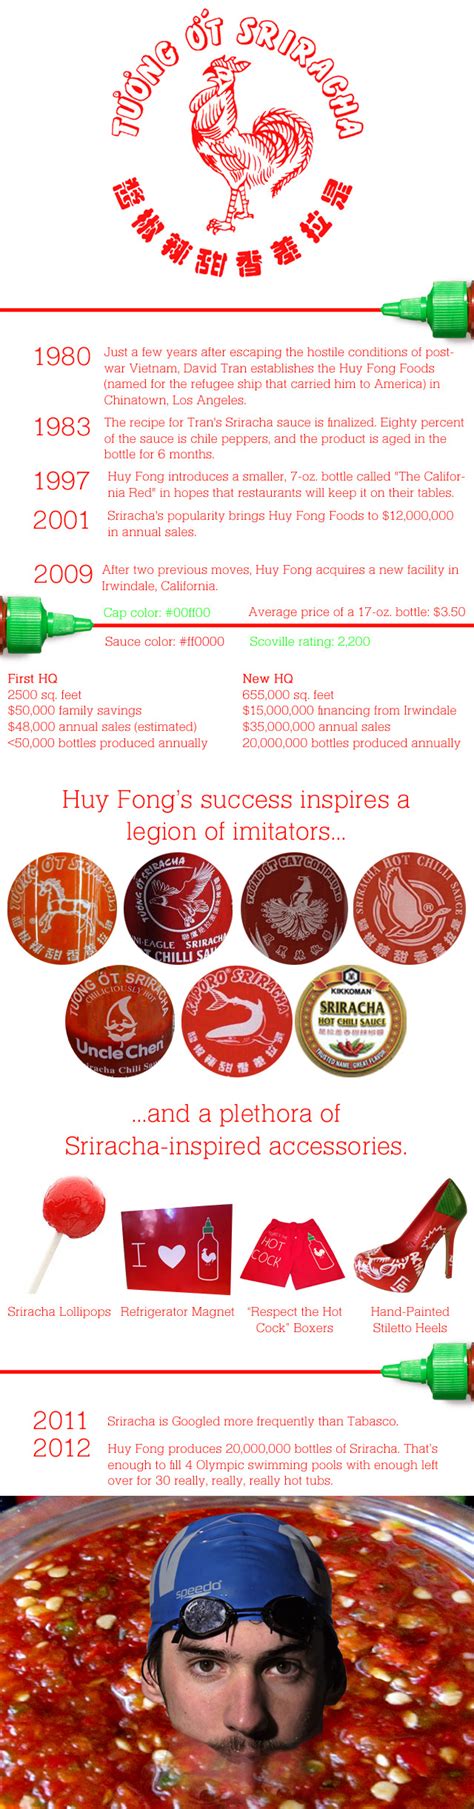 Huy fong, the original sriracha sauce, has been around for 30 years, although its seeming ubiquity mashed is the ultimate destination for food lovers. Huy Fong's Sriracha Hot Sauce | Sriracha, Hot sauce, Sauce